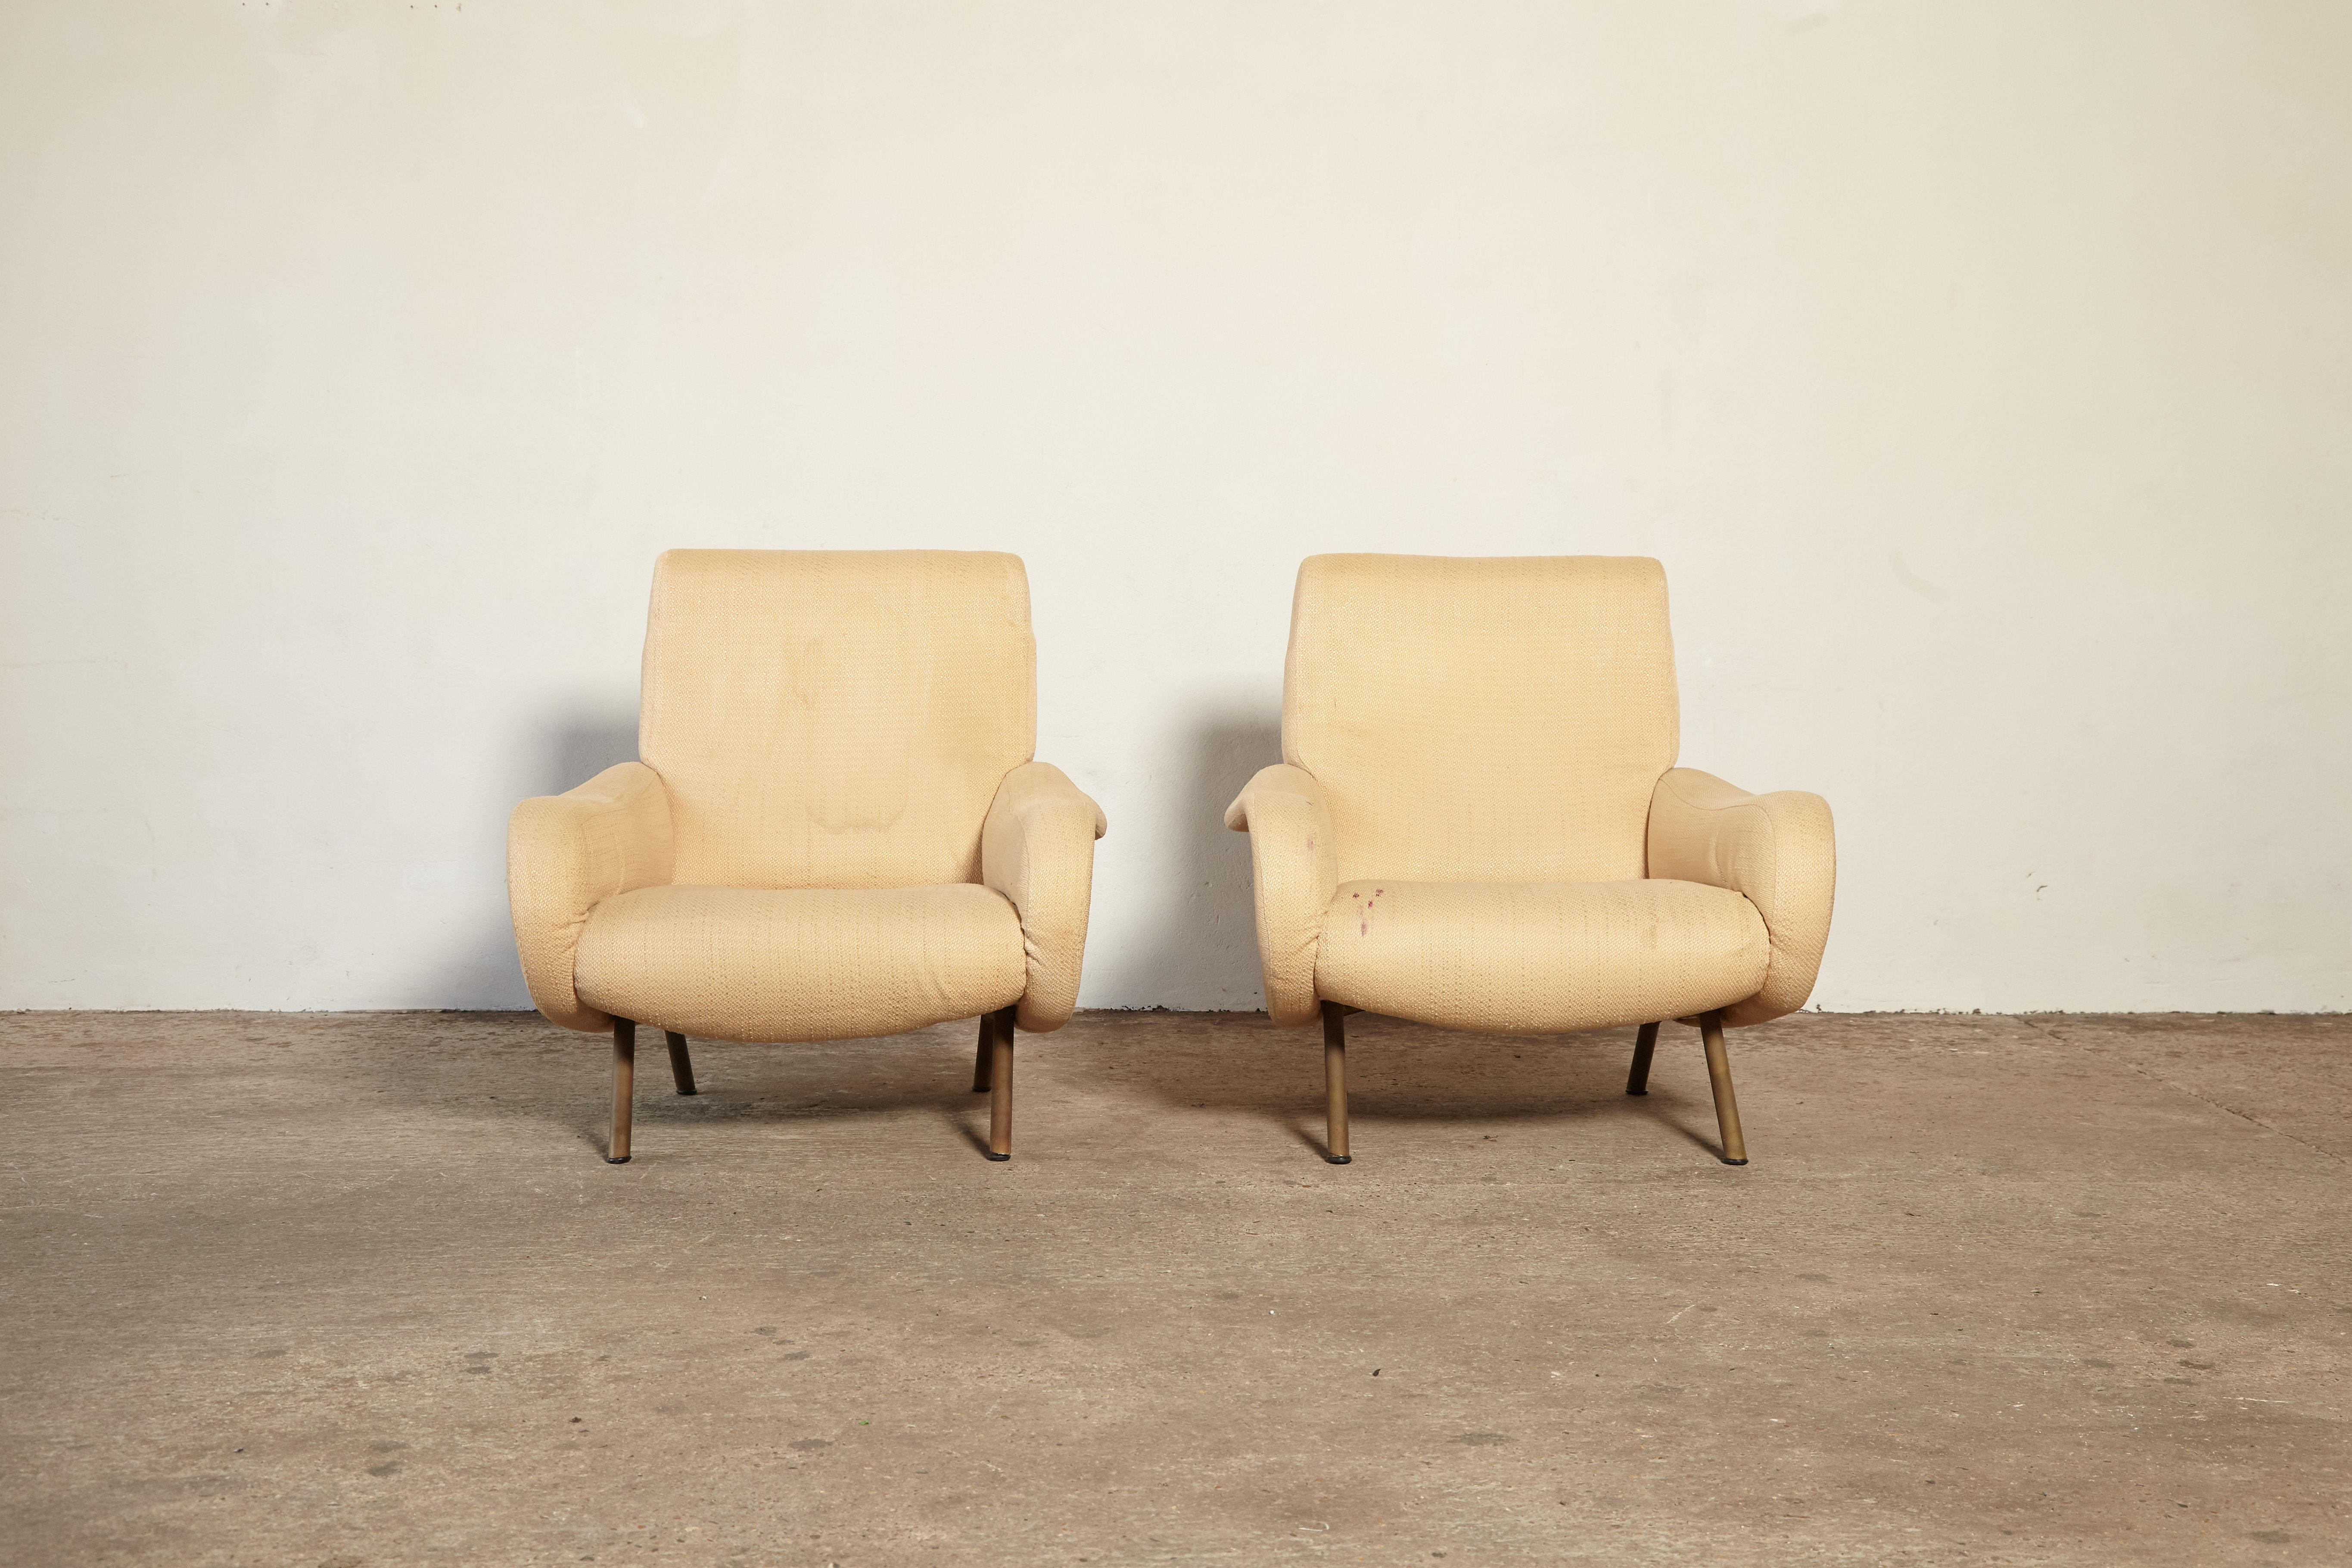 20th Century Authentic Marco Zanuso Lady Chairs, Arflex, Italy, 1960s for Re-Upholstery